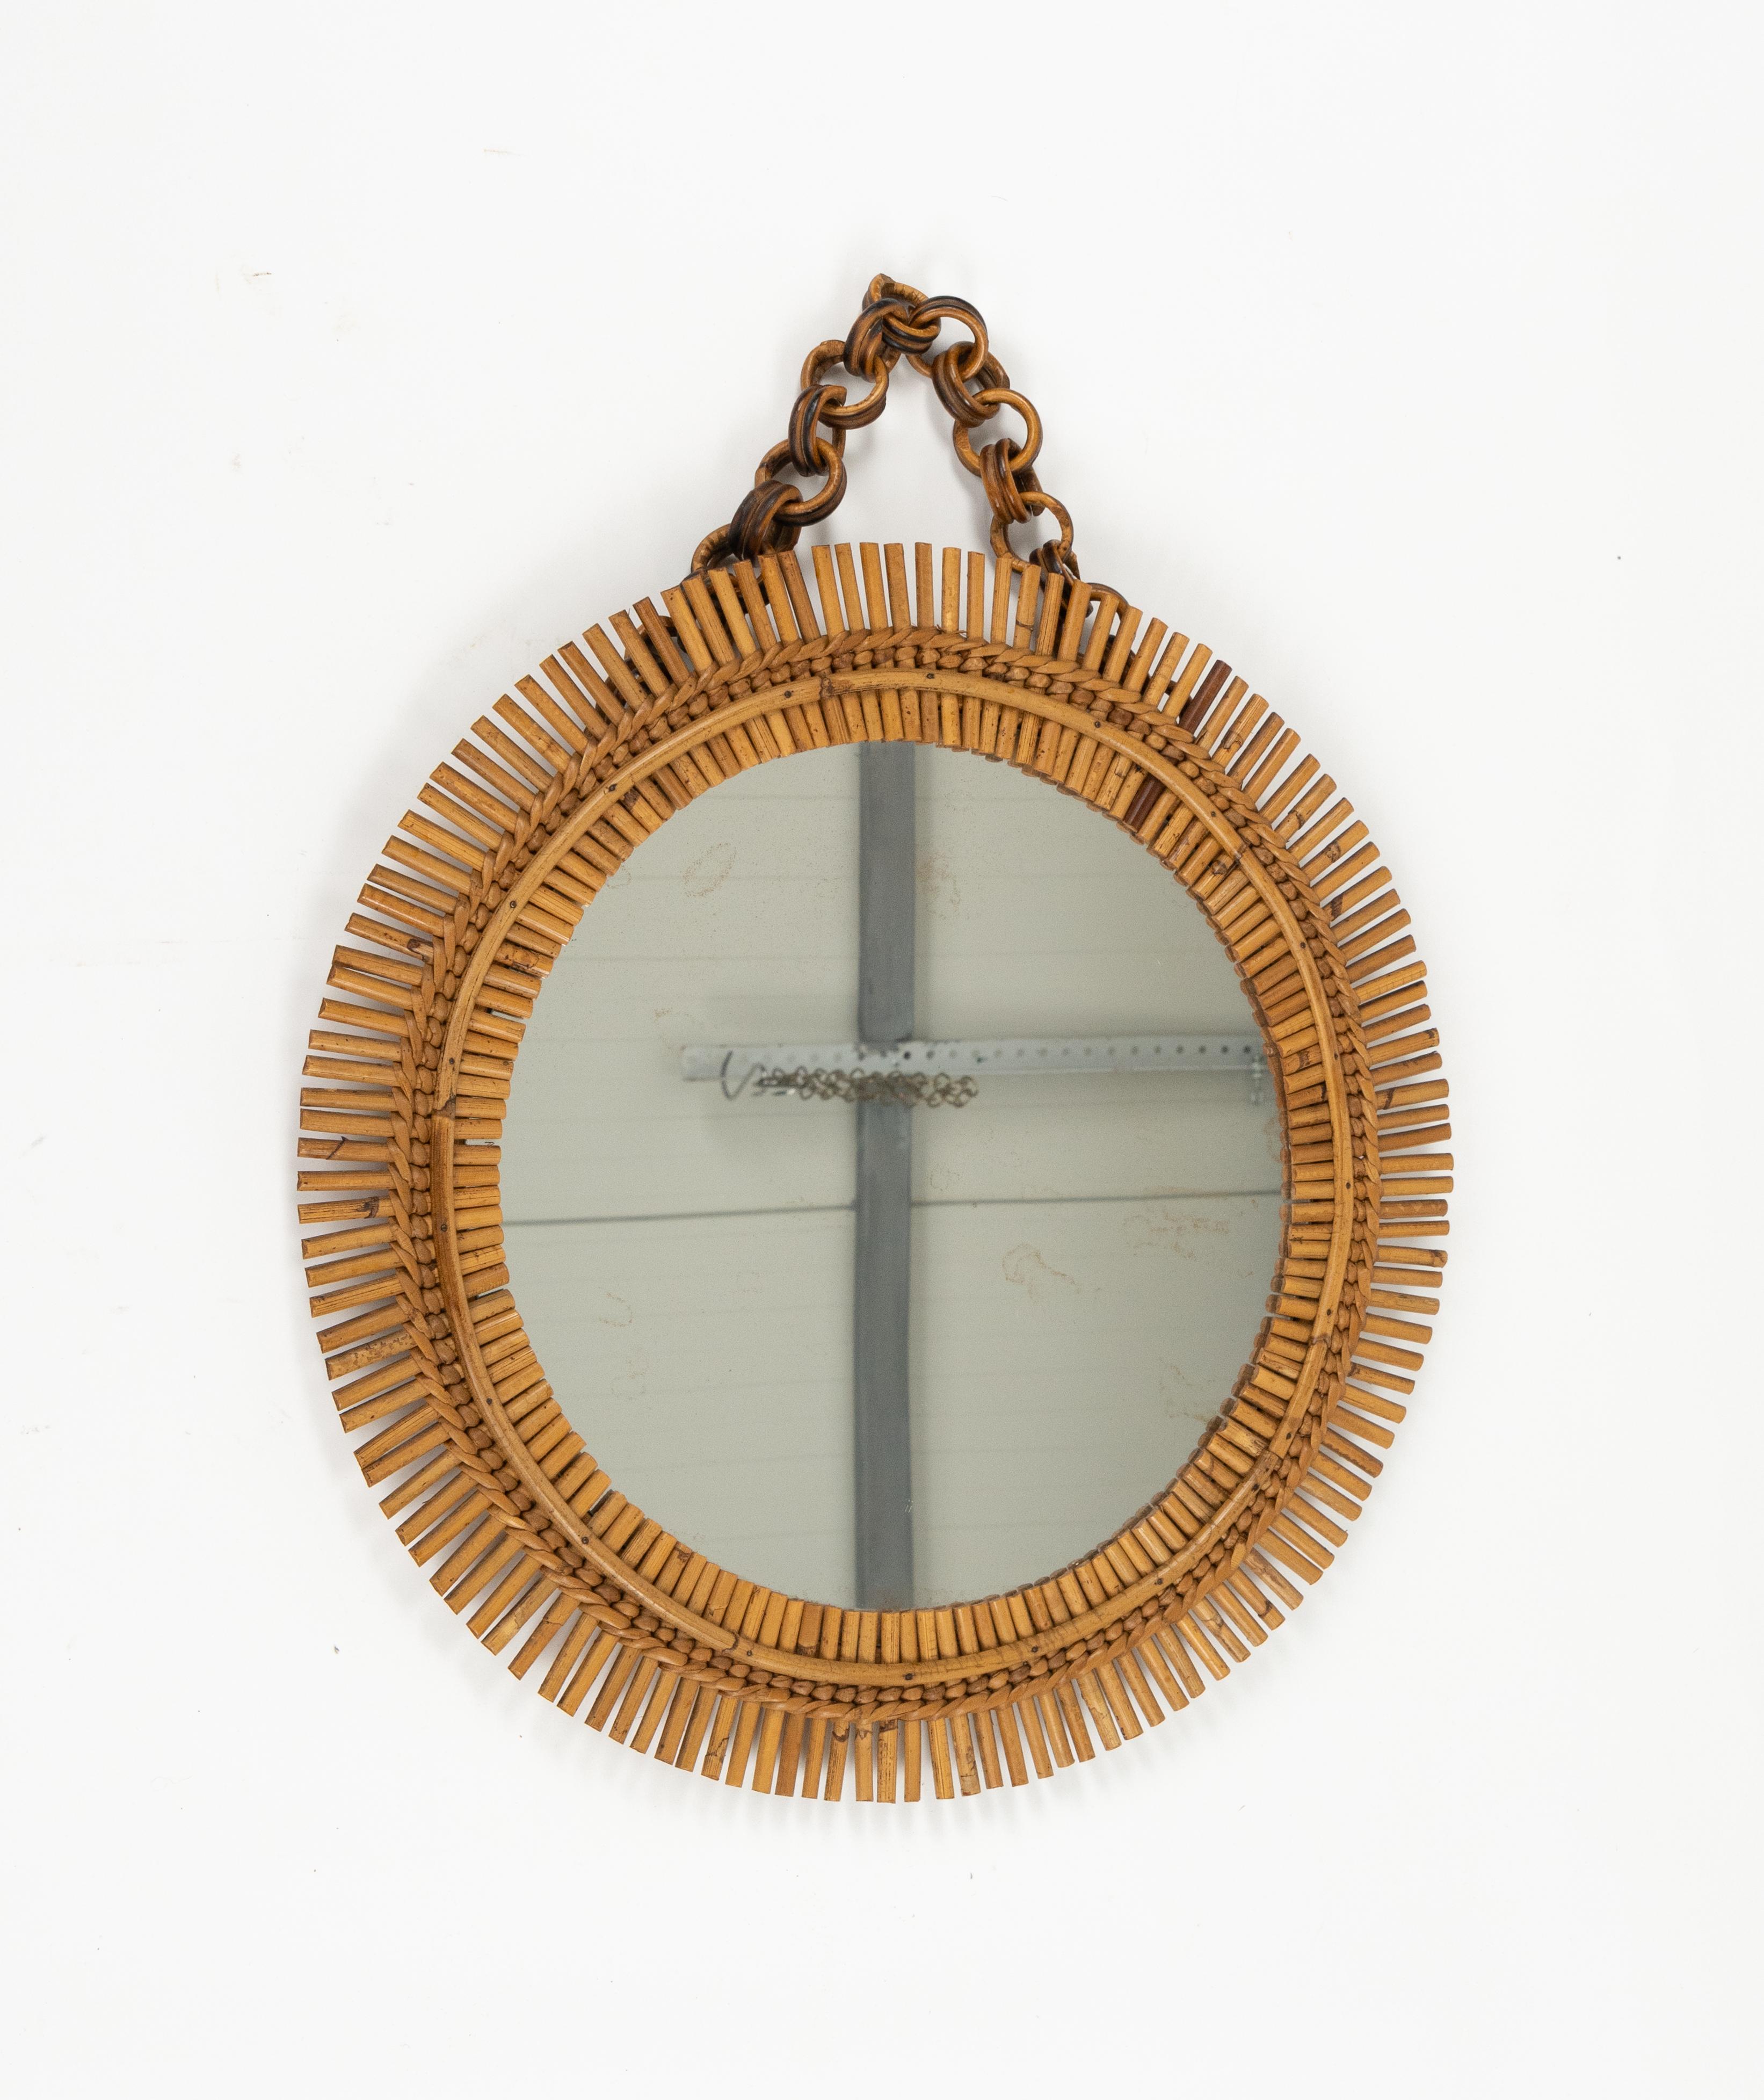 Italian Midcentury Rattan and Bamboo Round Wall Mirror with Chain, Italy 1960s For Sale